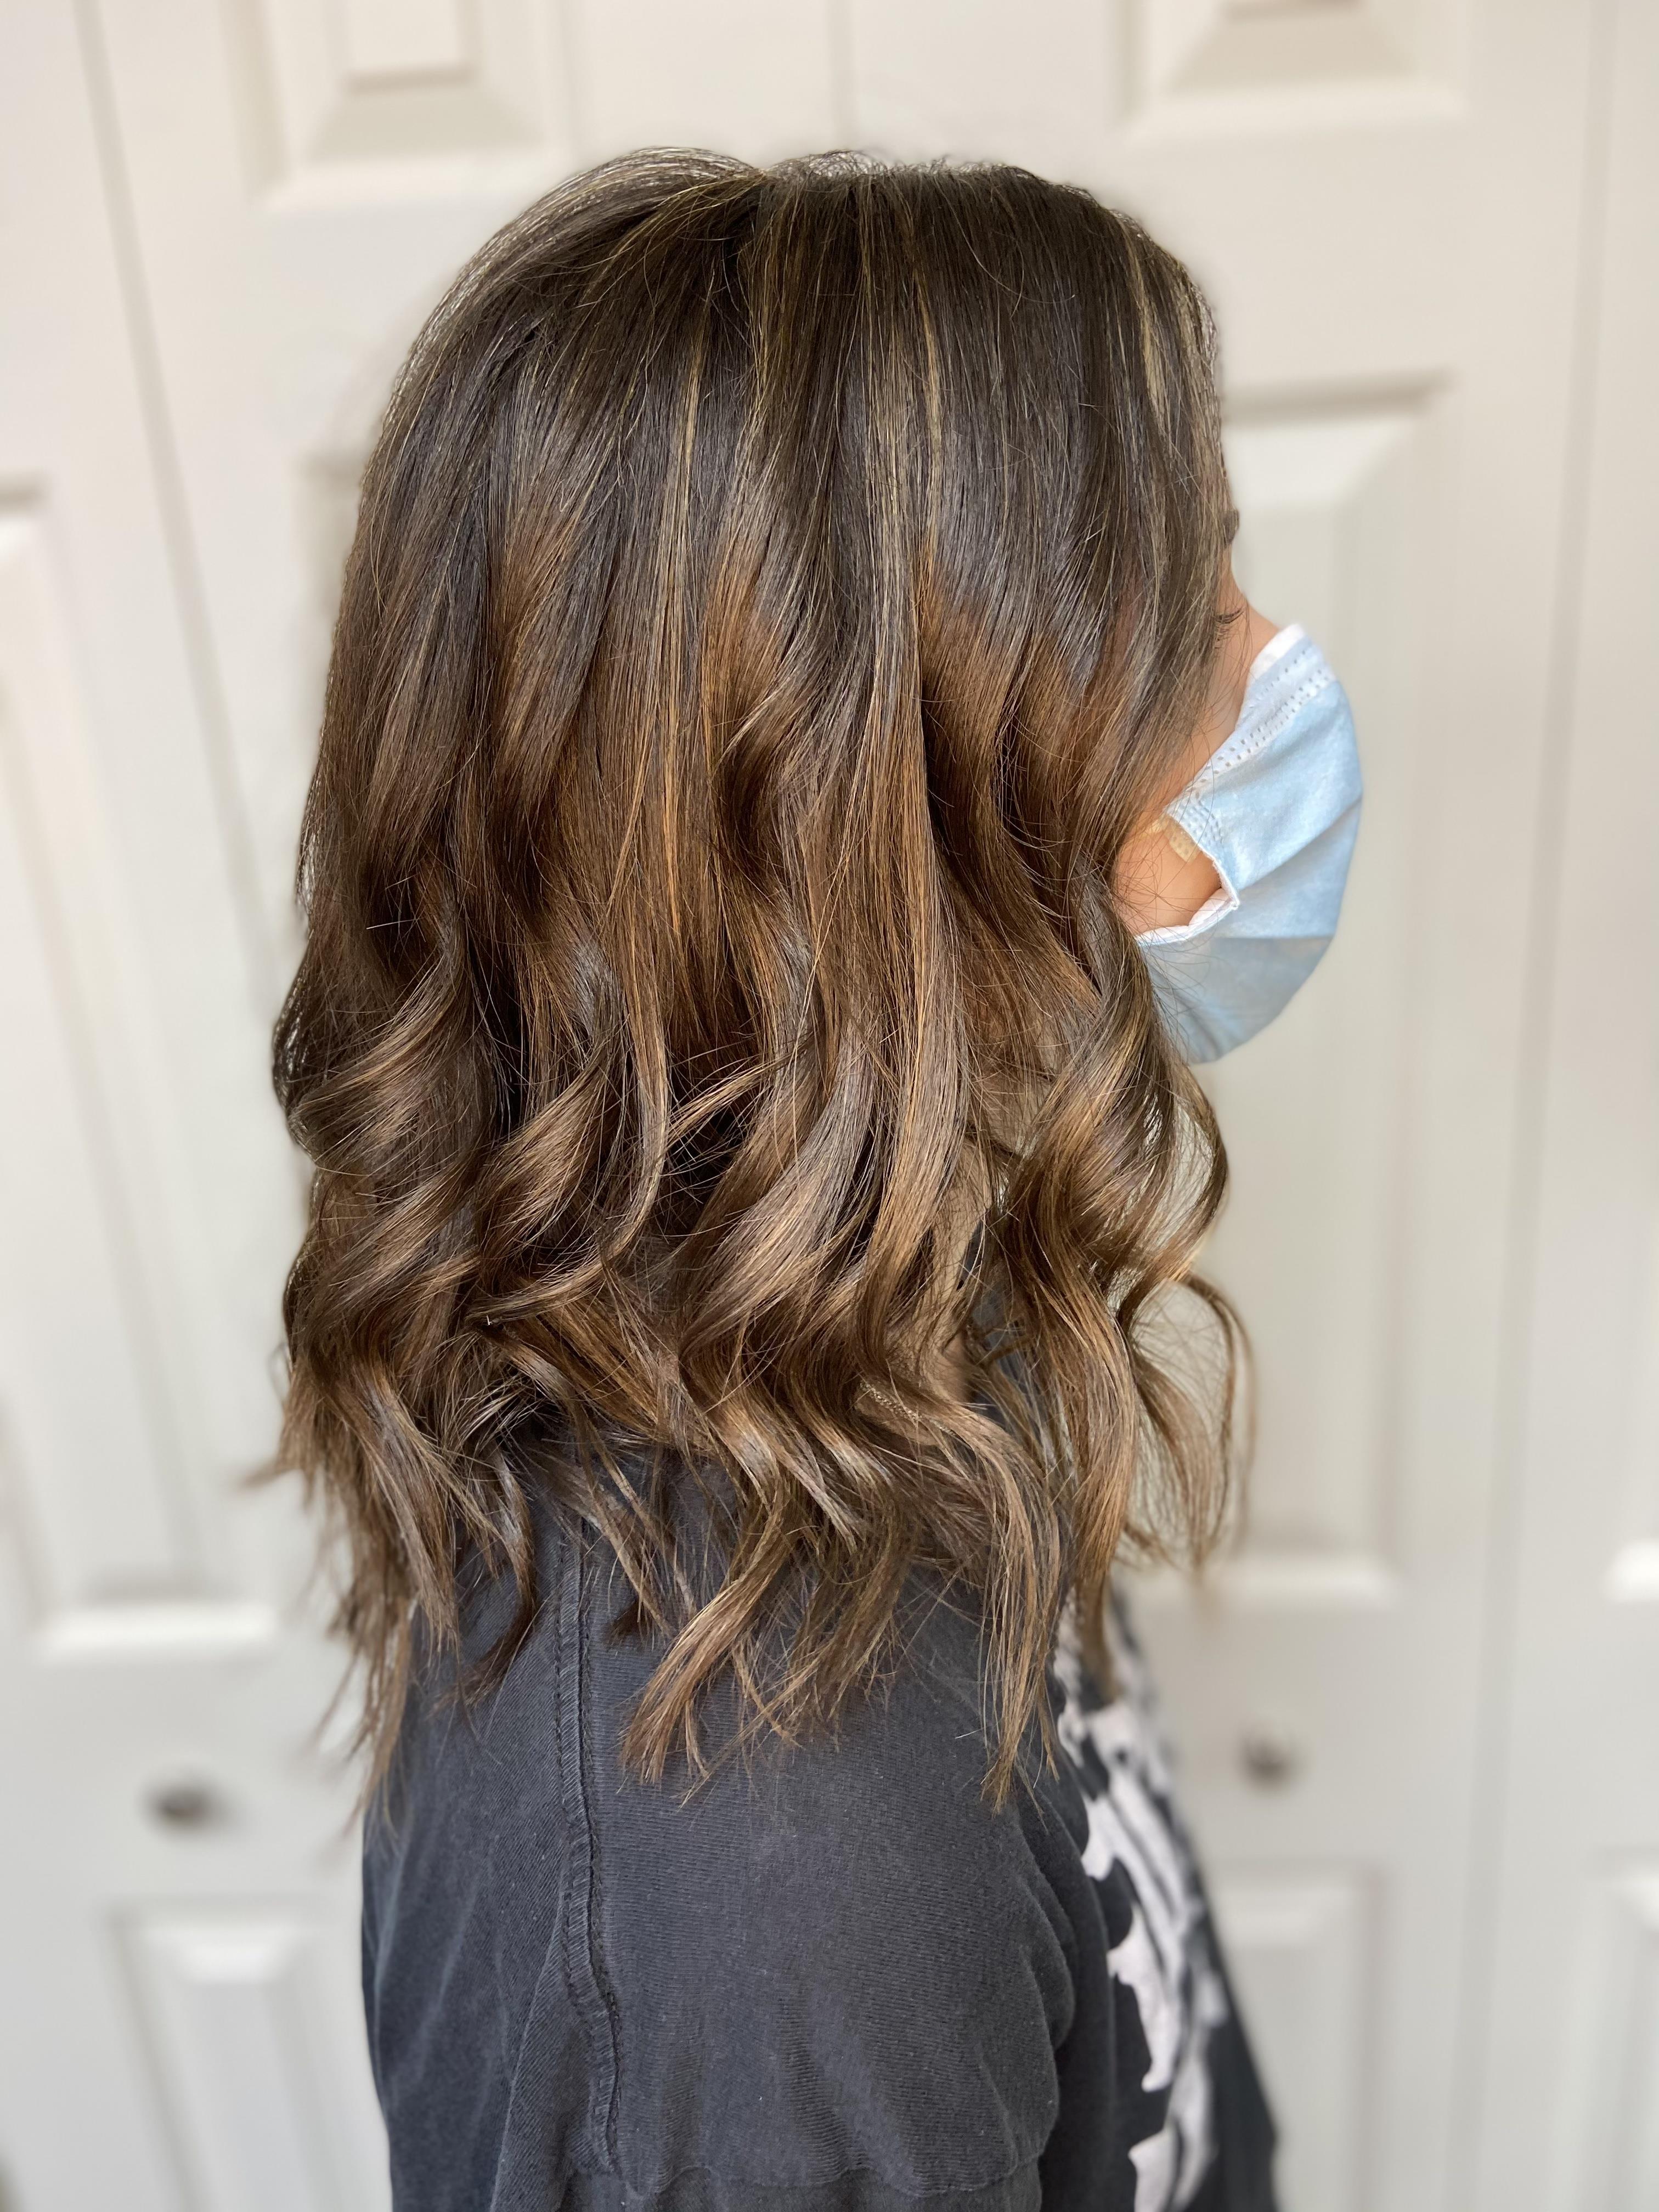 This espresso brown hair color adds - Spade Hair Studio